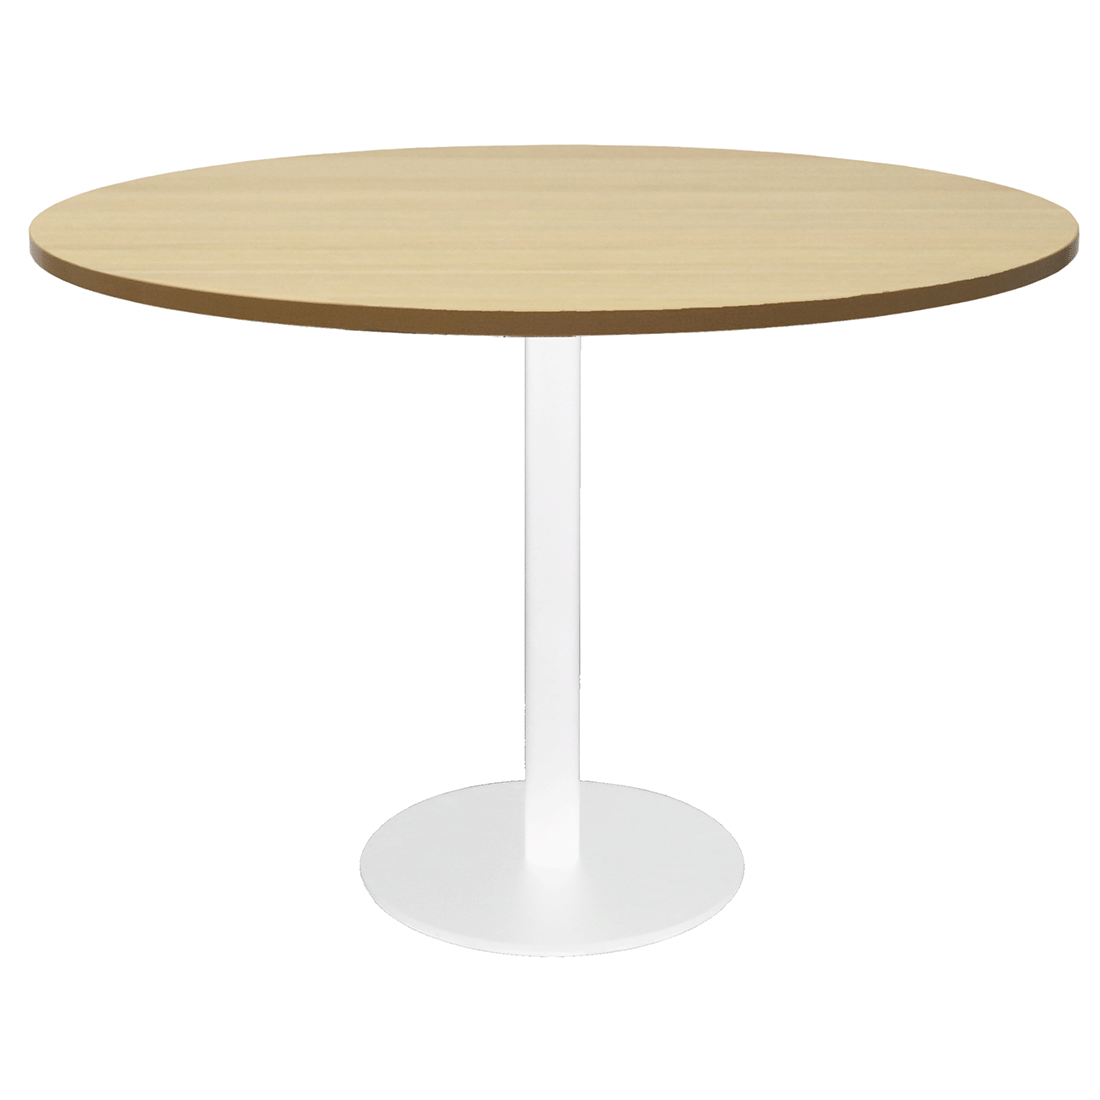 Switch Round Meeting Table 1200mm